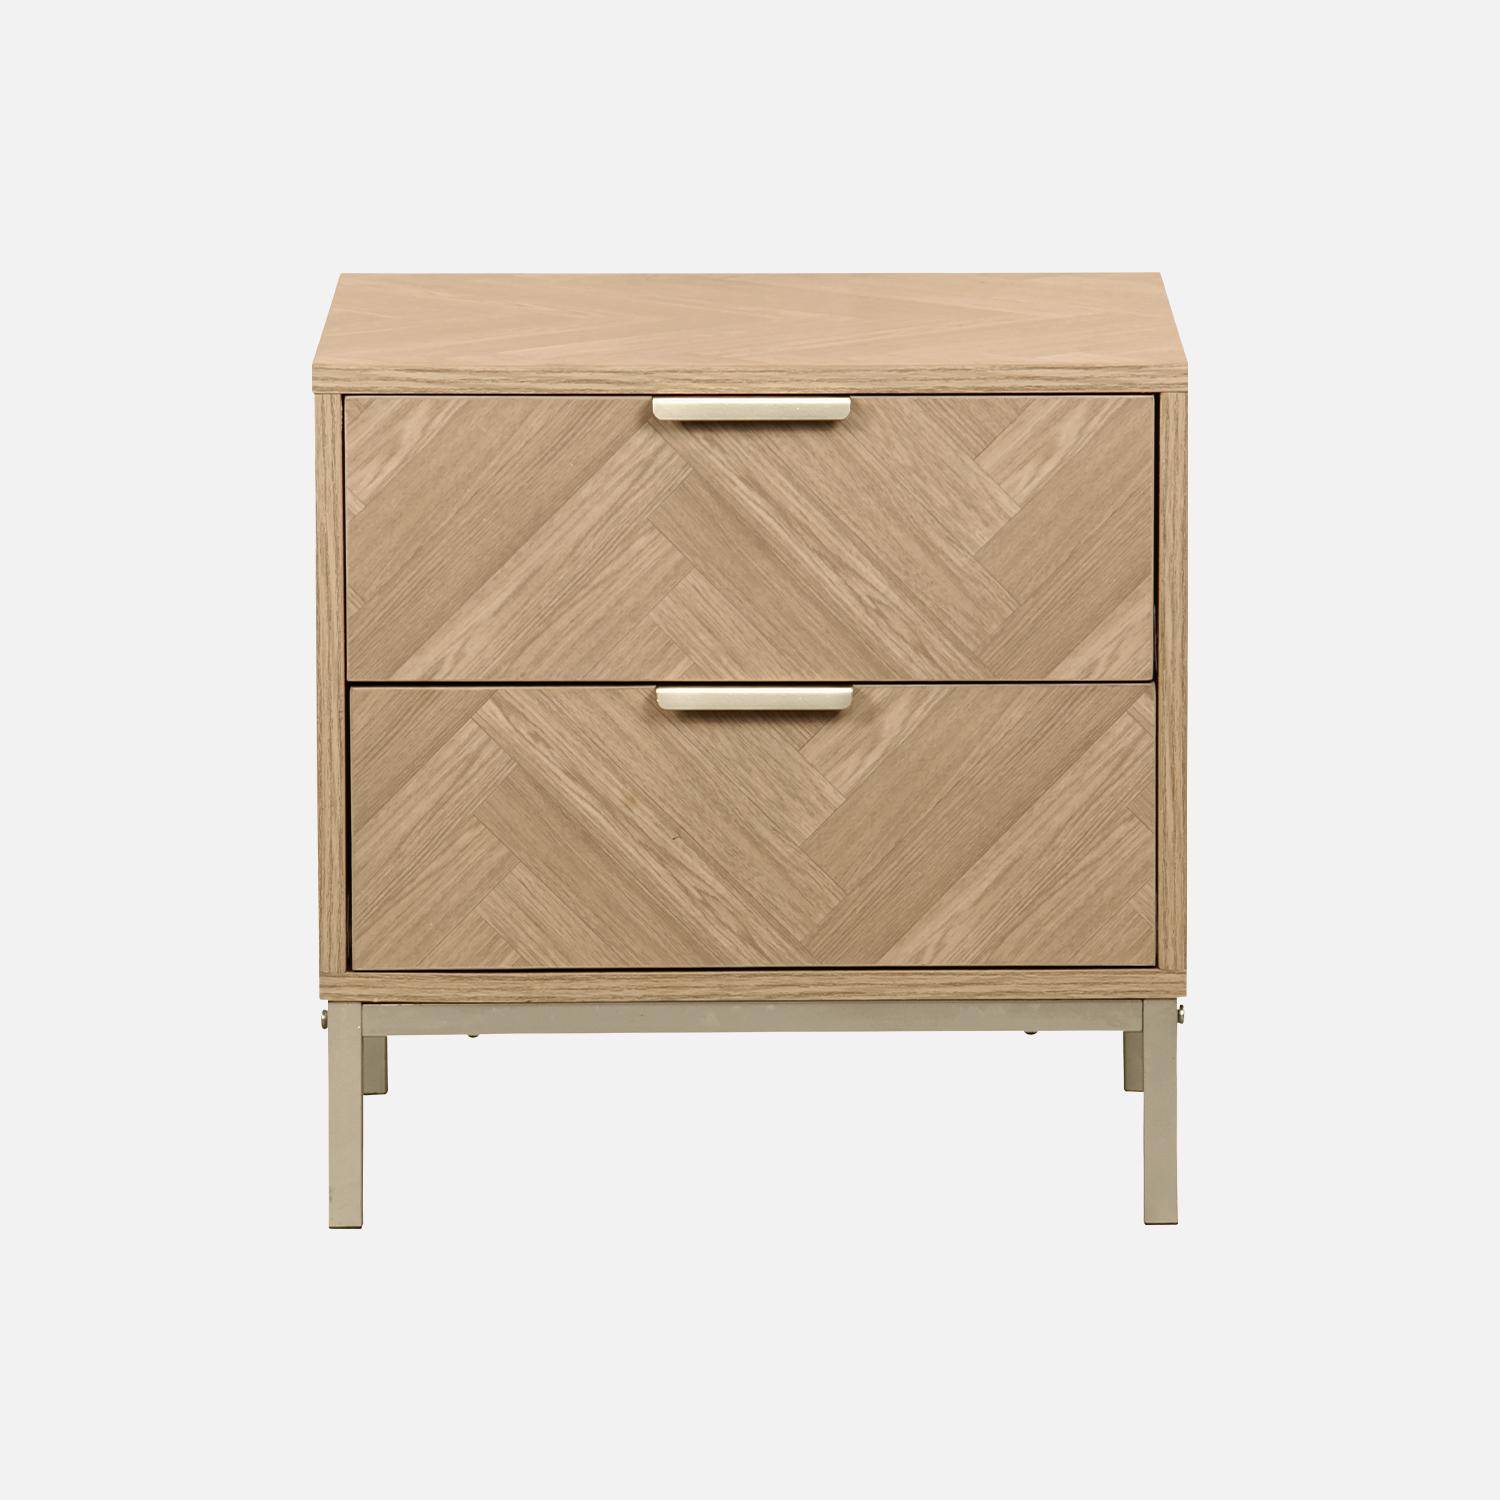 Herringbone bedside table with 2 drawers, 45x40x45cm - Budapest - Natural Photo4